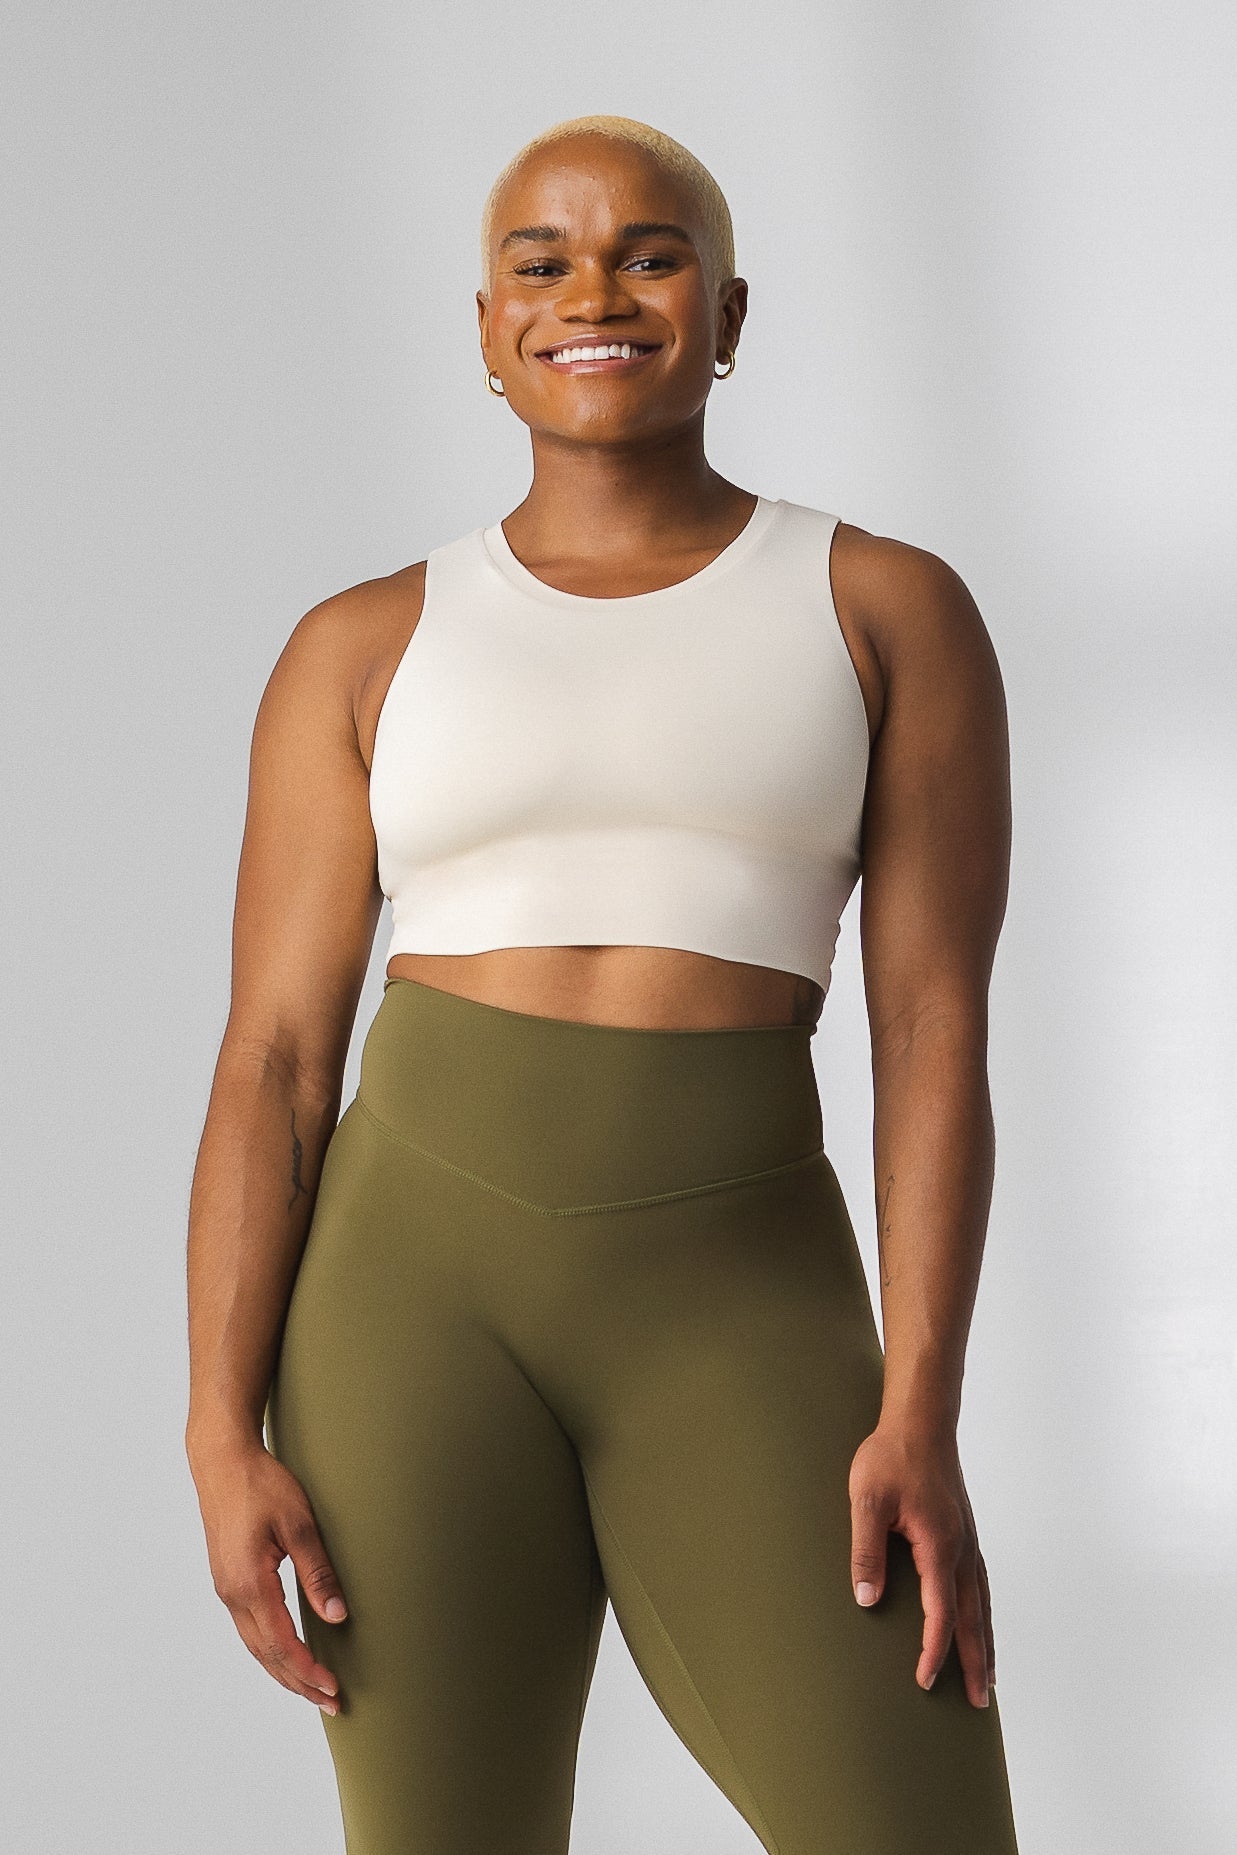 Women's Athletic Tops - Sports Bras, Jackets, Hoodies, Shirts & Tanks –  Tagged longline – Vitality Athletic Apparel